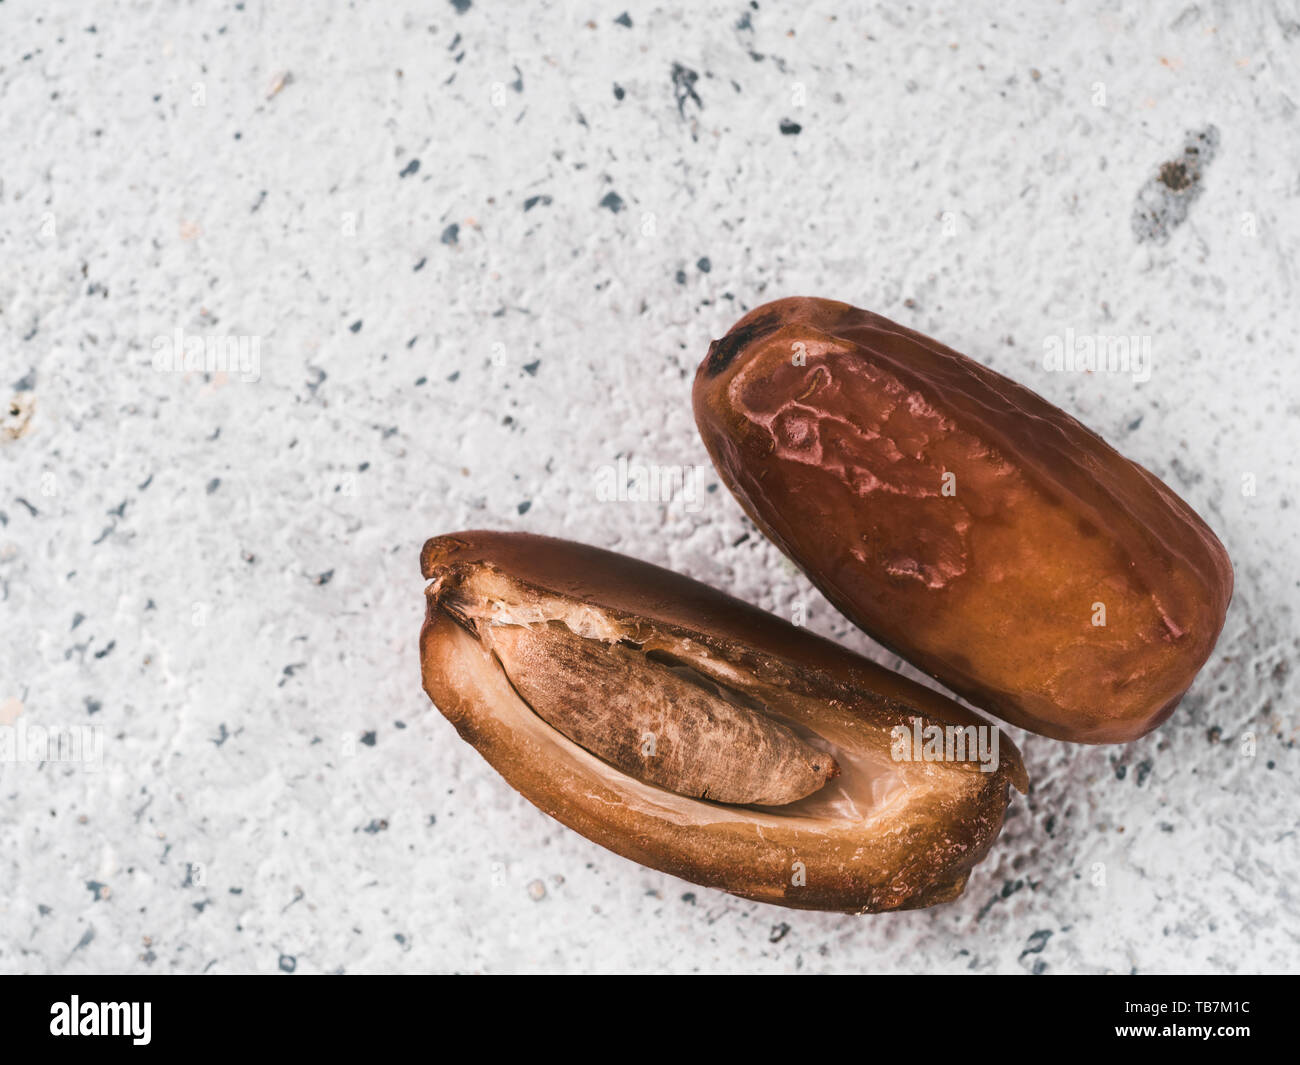 Sweet raw dates on gray cement background. Whole dates and half with bone date on grey concrete surface. Sugar free alternatives concept with space for text. Top view. Extreme close up view Stock Photo